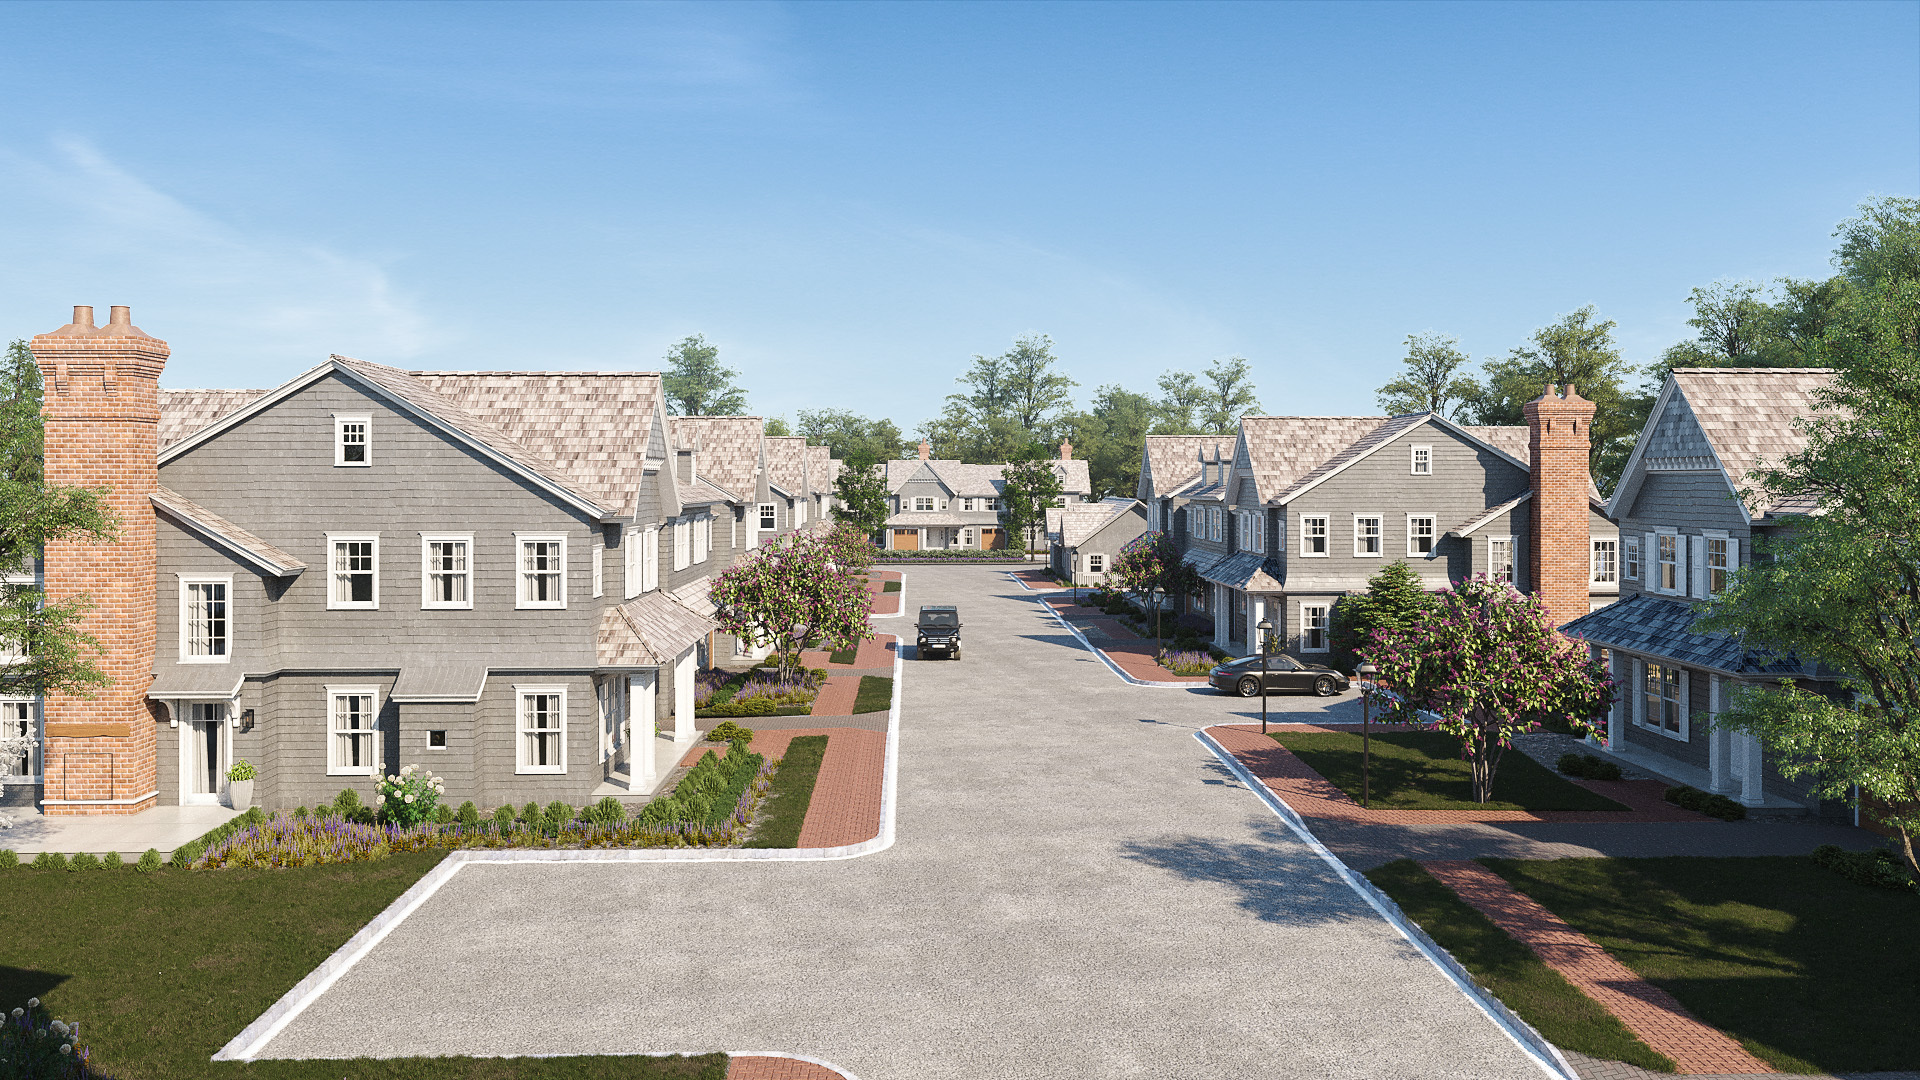 A streetscape rendering of The Latch at Southampton Village.